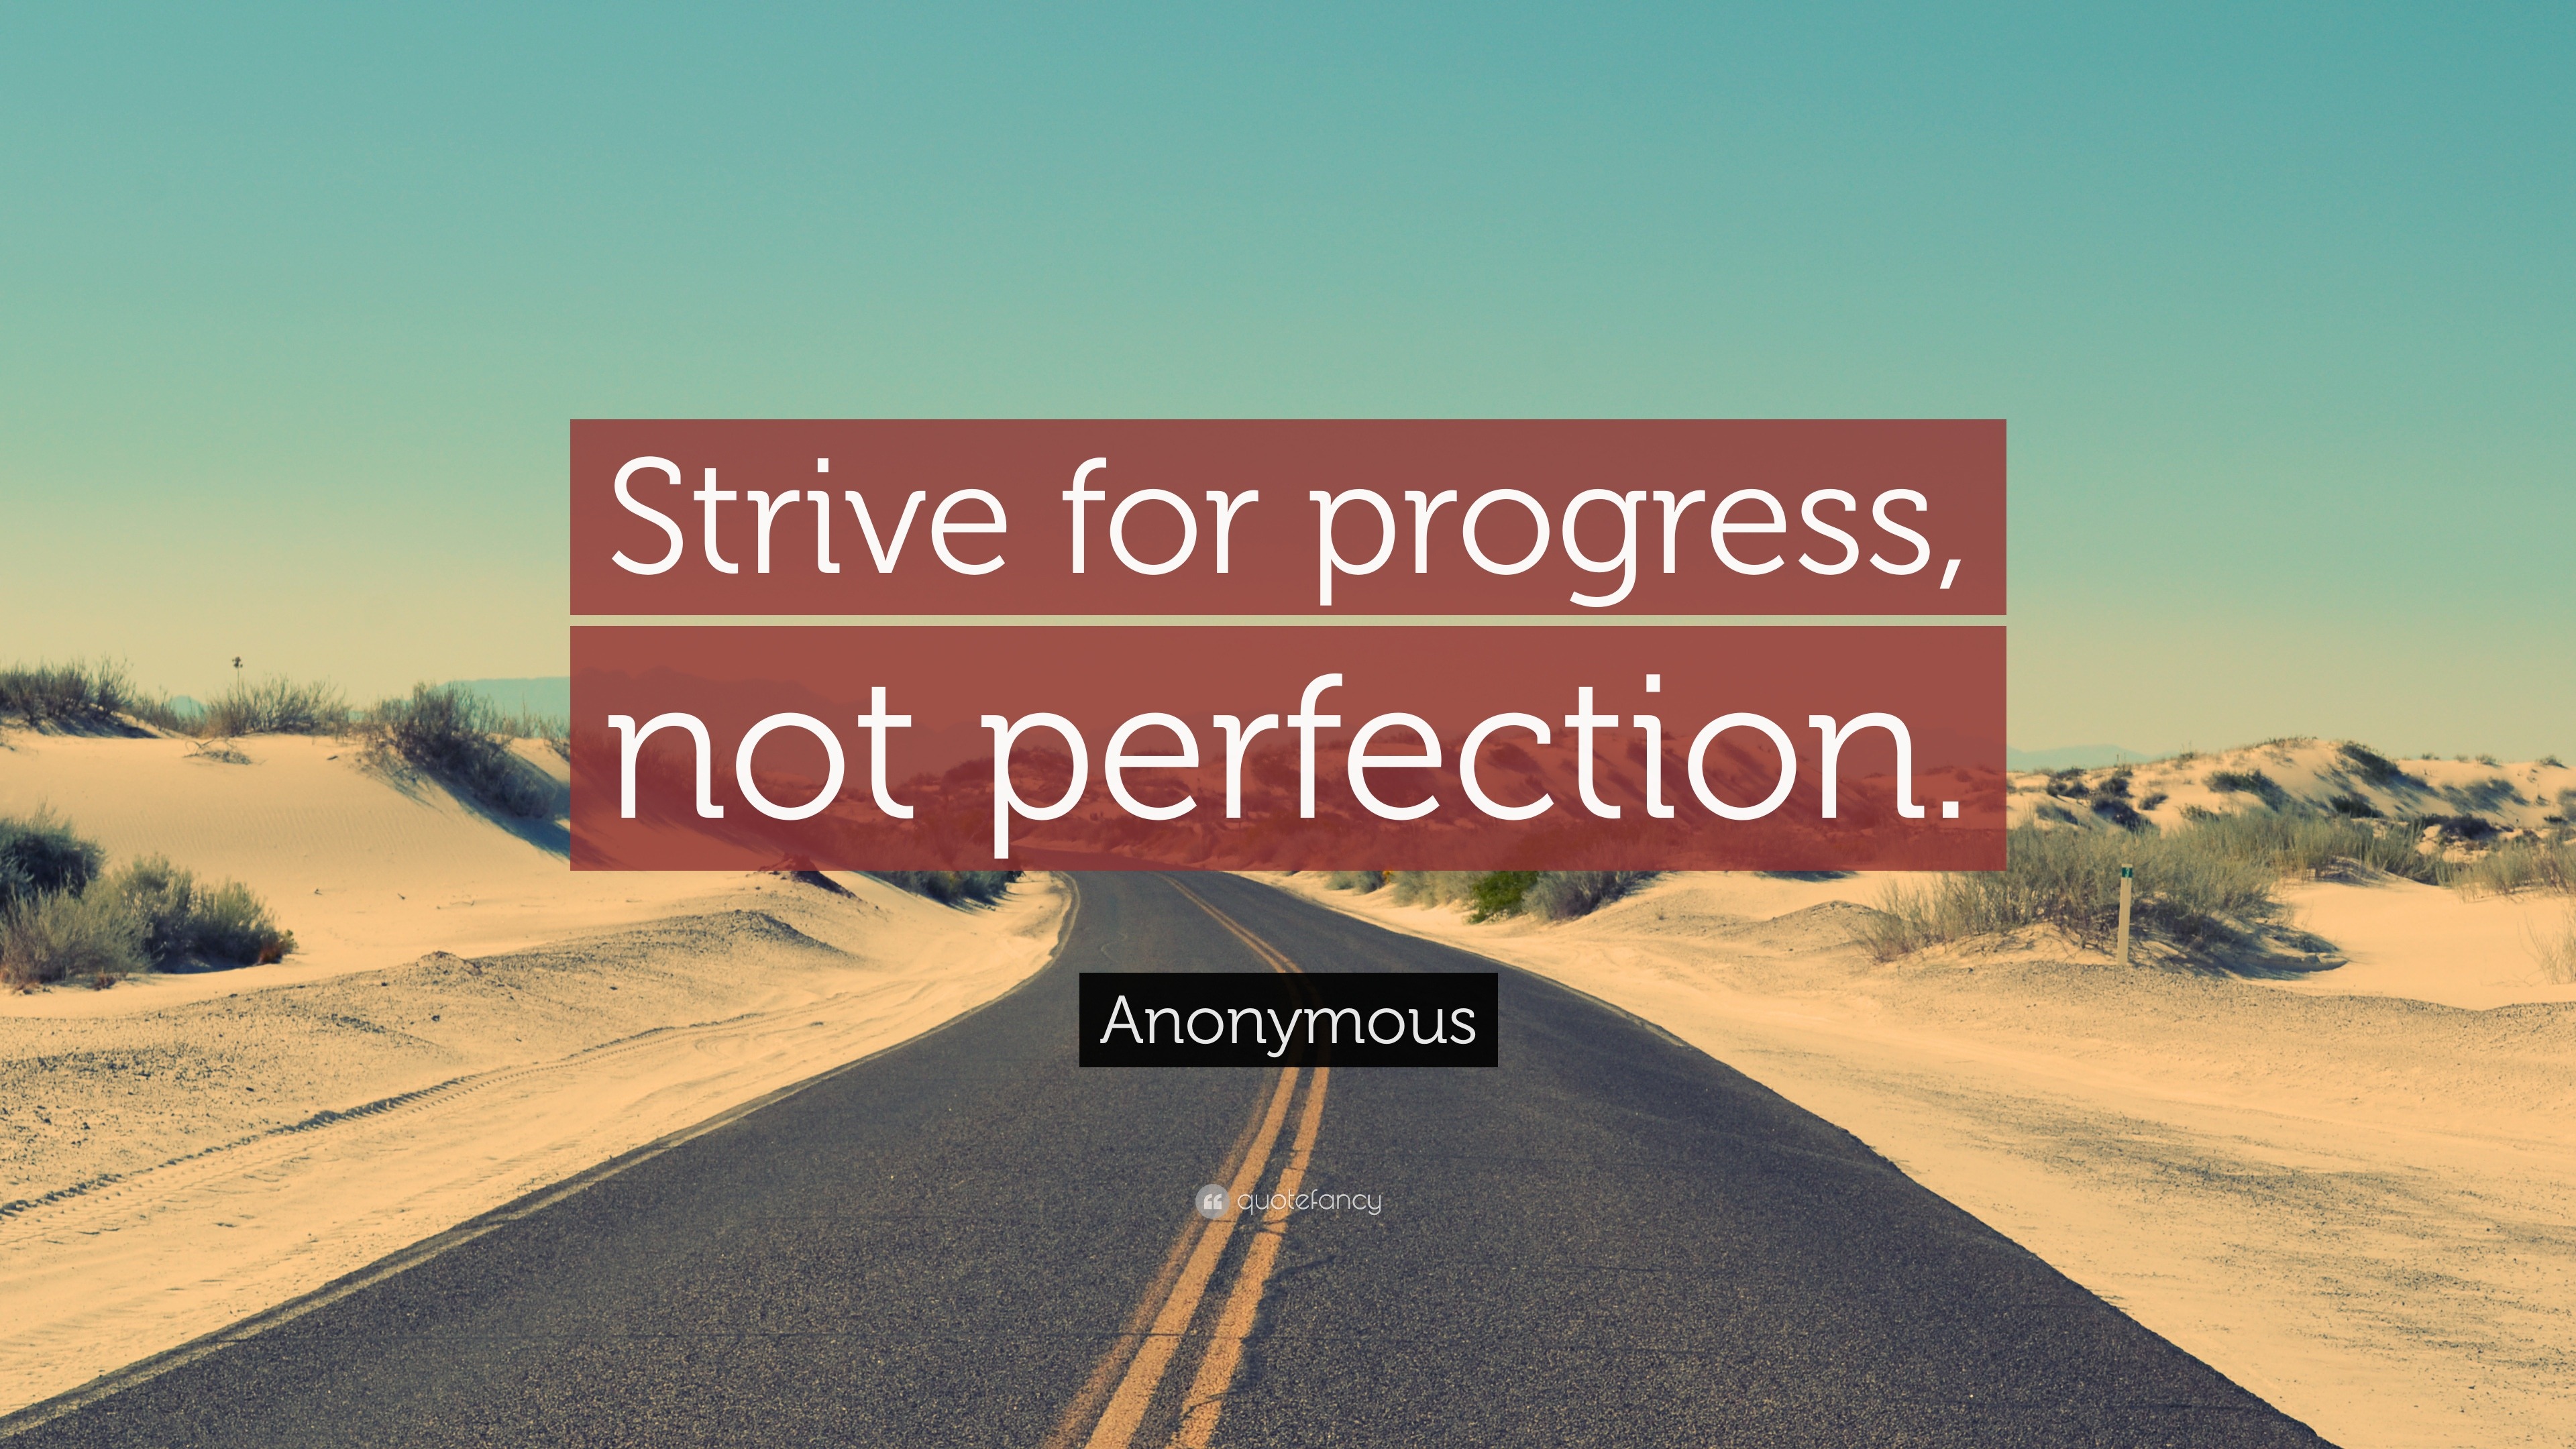 Anonymous Quote “Strive for progress, not perfection.”